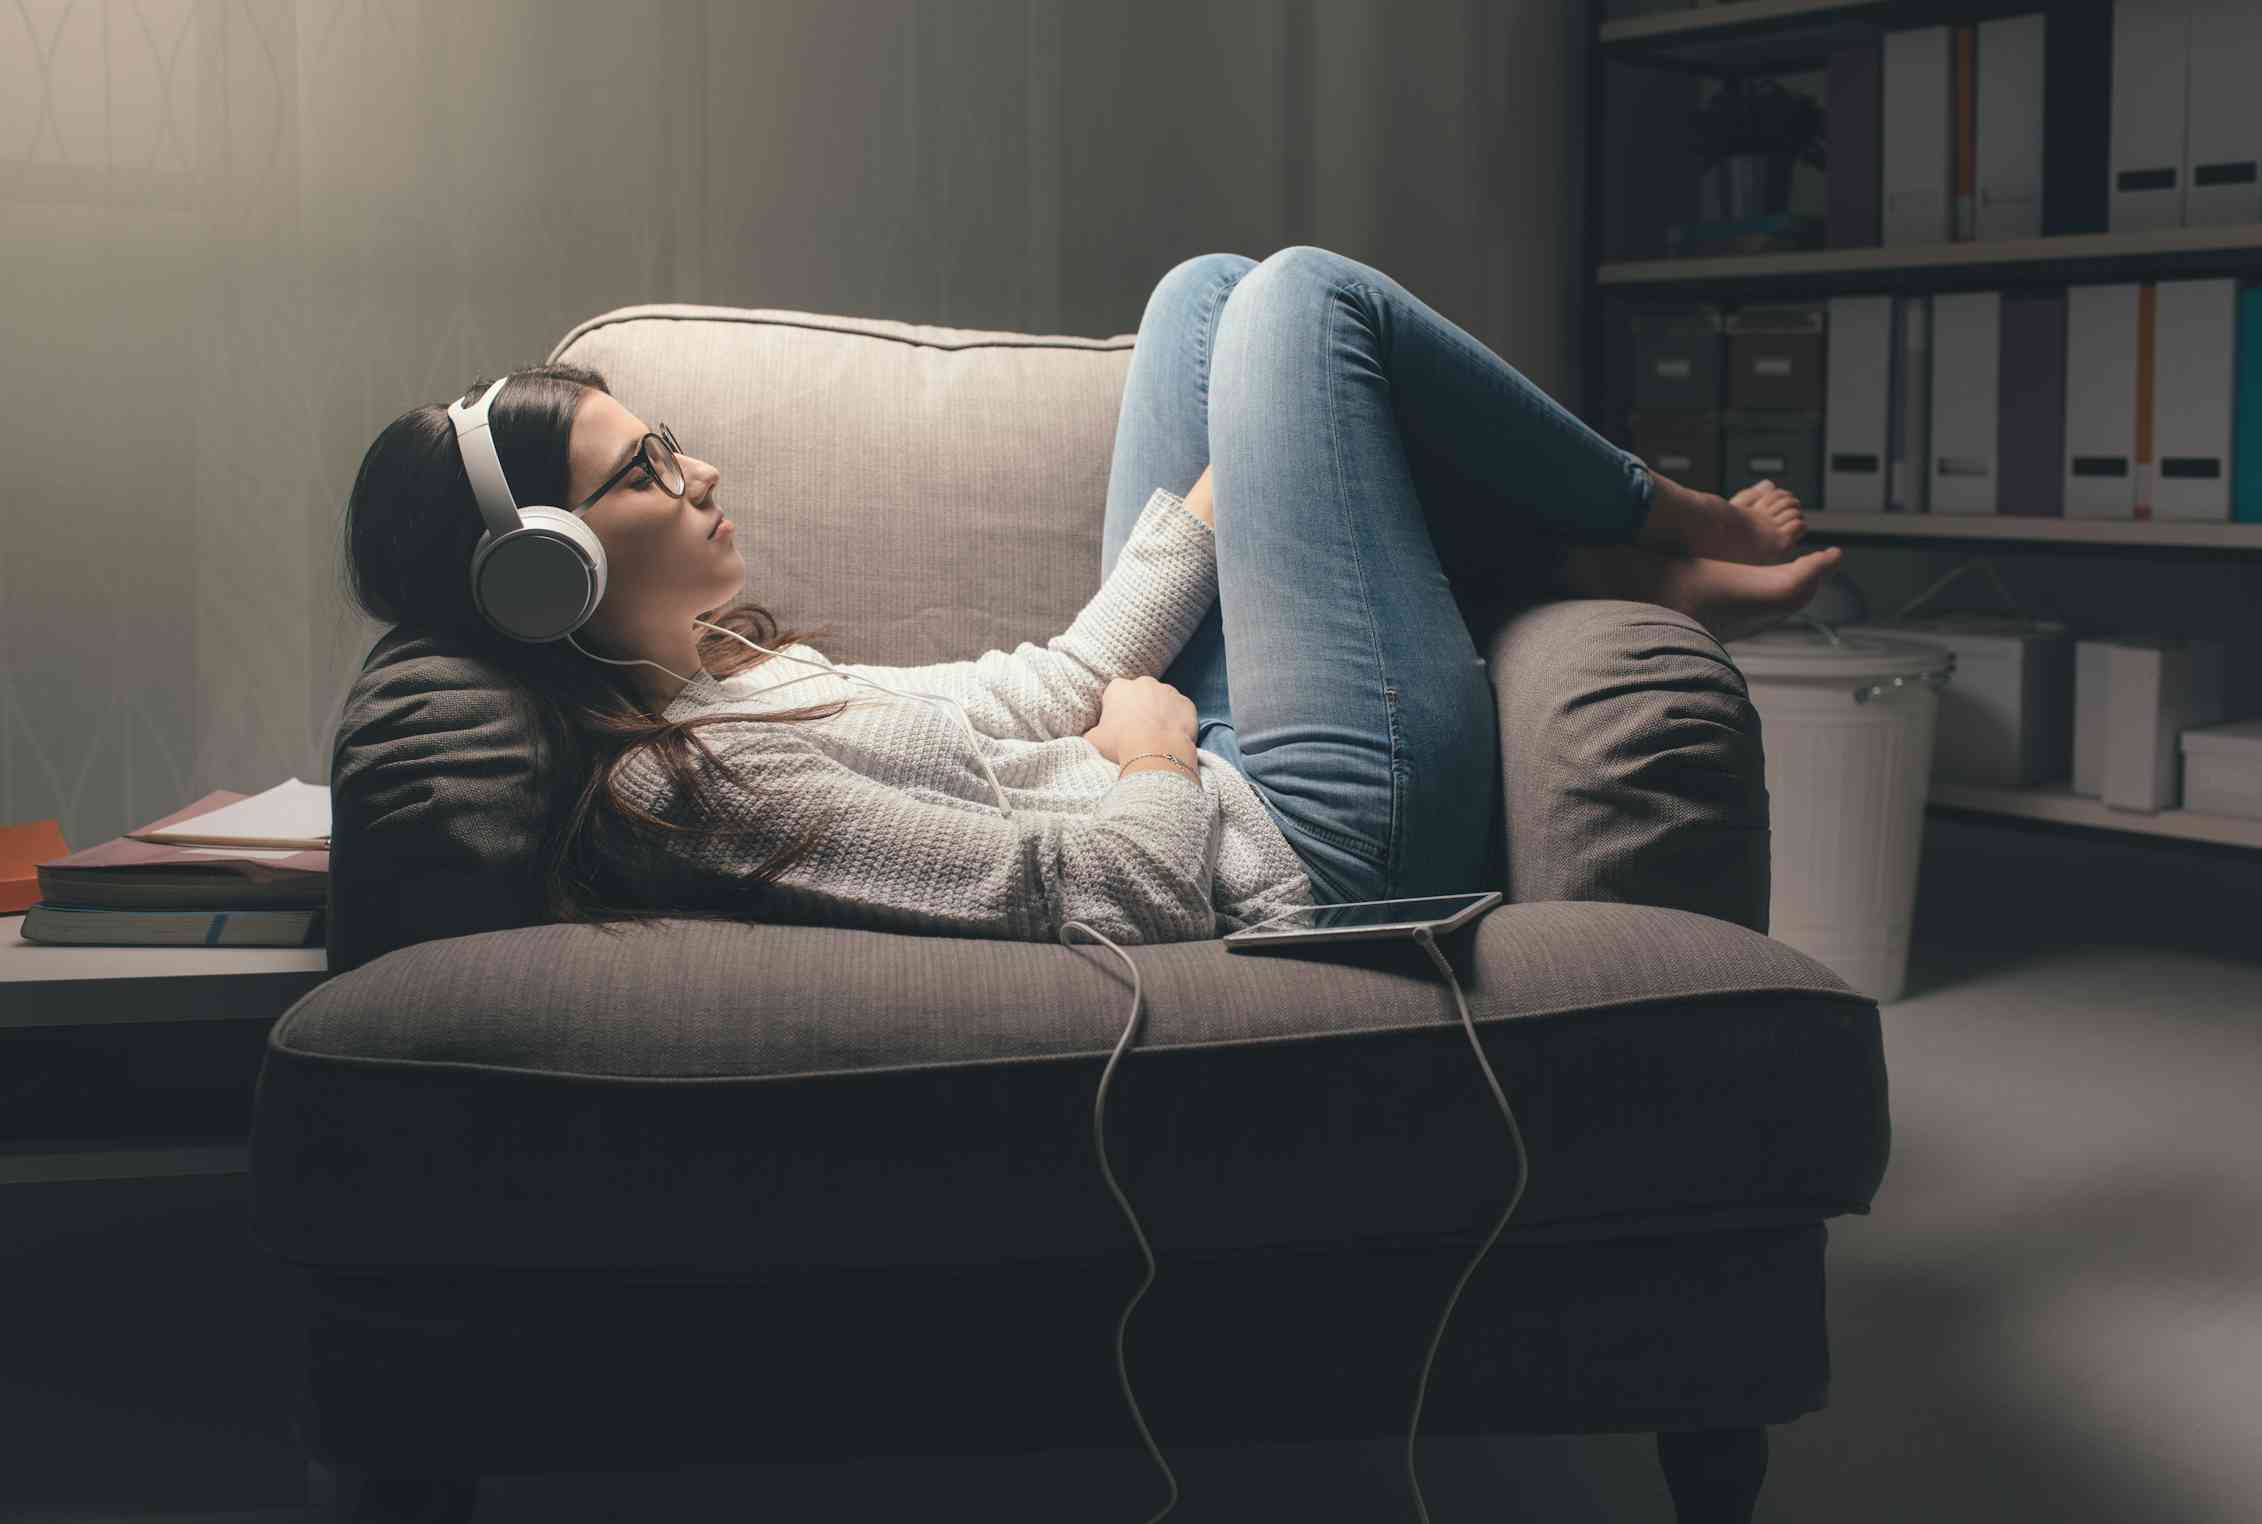 A woman on a lounge chair with headphones.